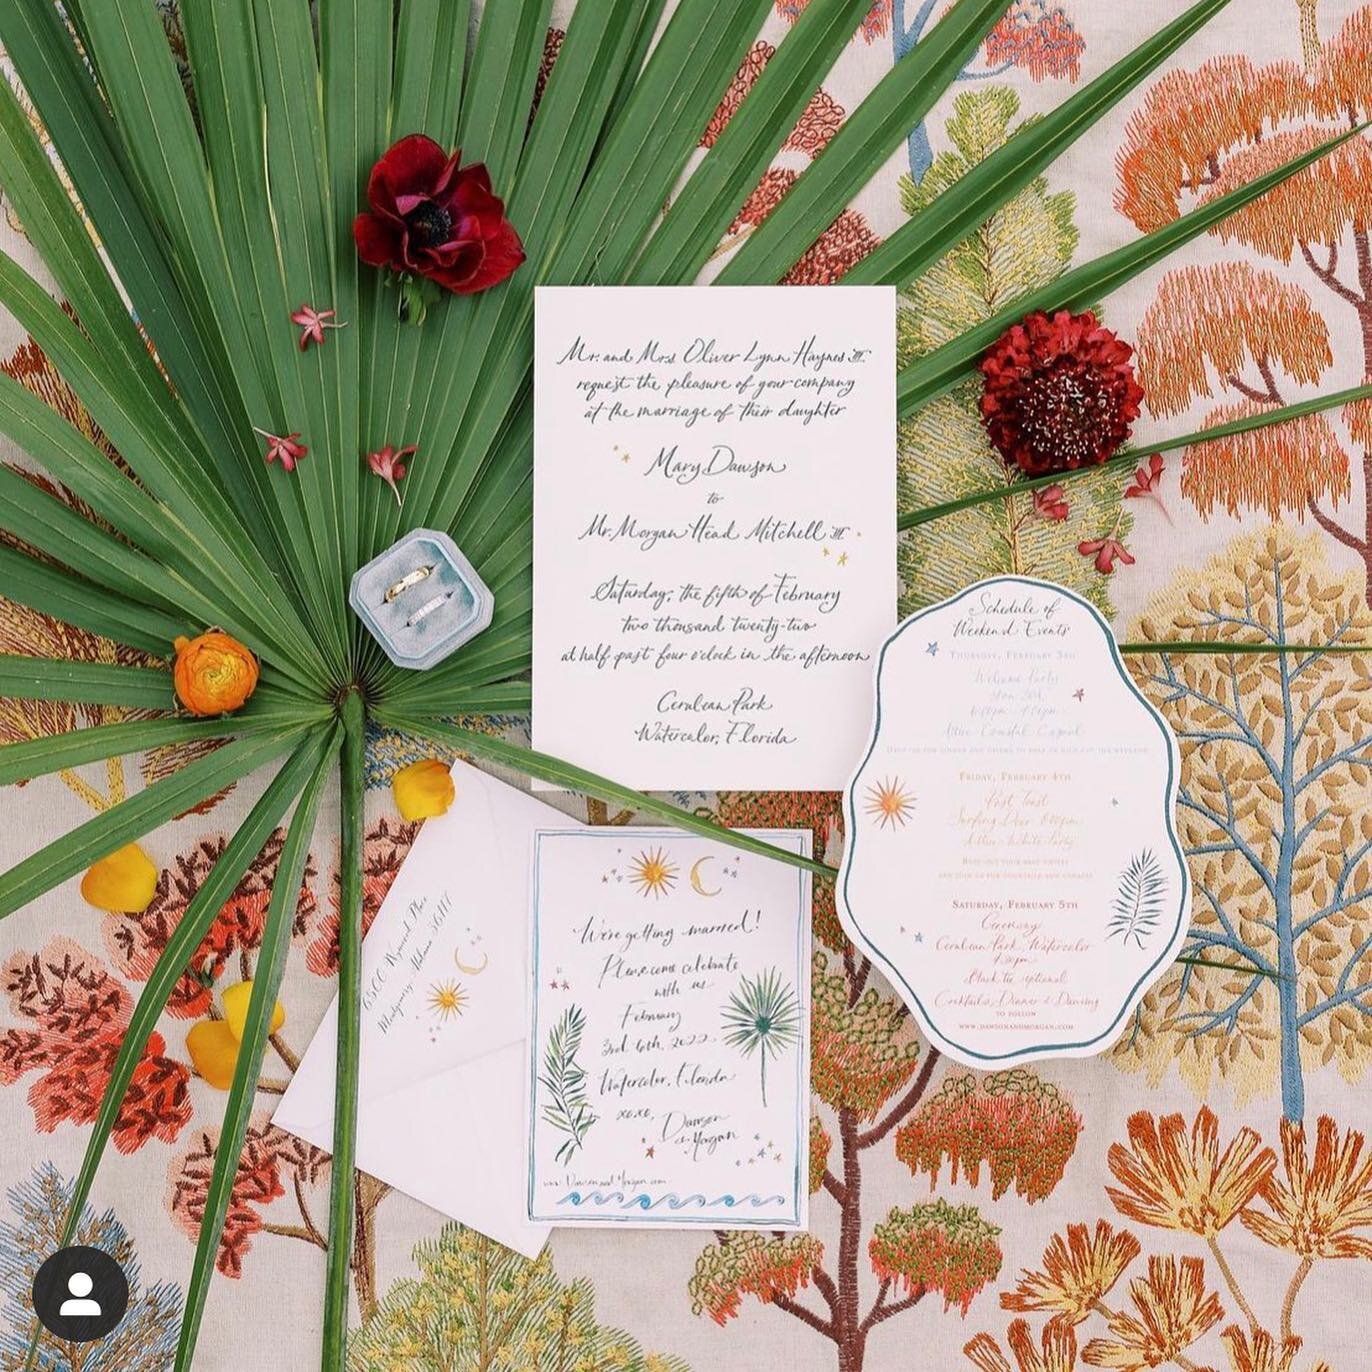 An absolute honor to create this &ldquo;tropical party in an envelope&rdquo; for the one and only @dawson__haynes @eastonevents @erickelley @overthemoon @lauralinescalligraphy